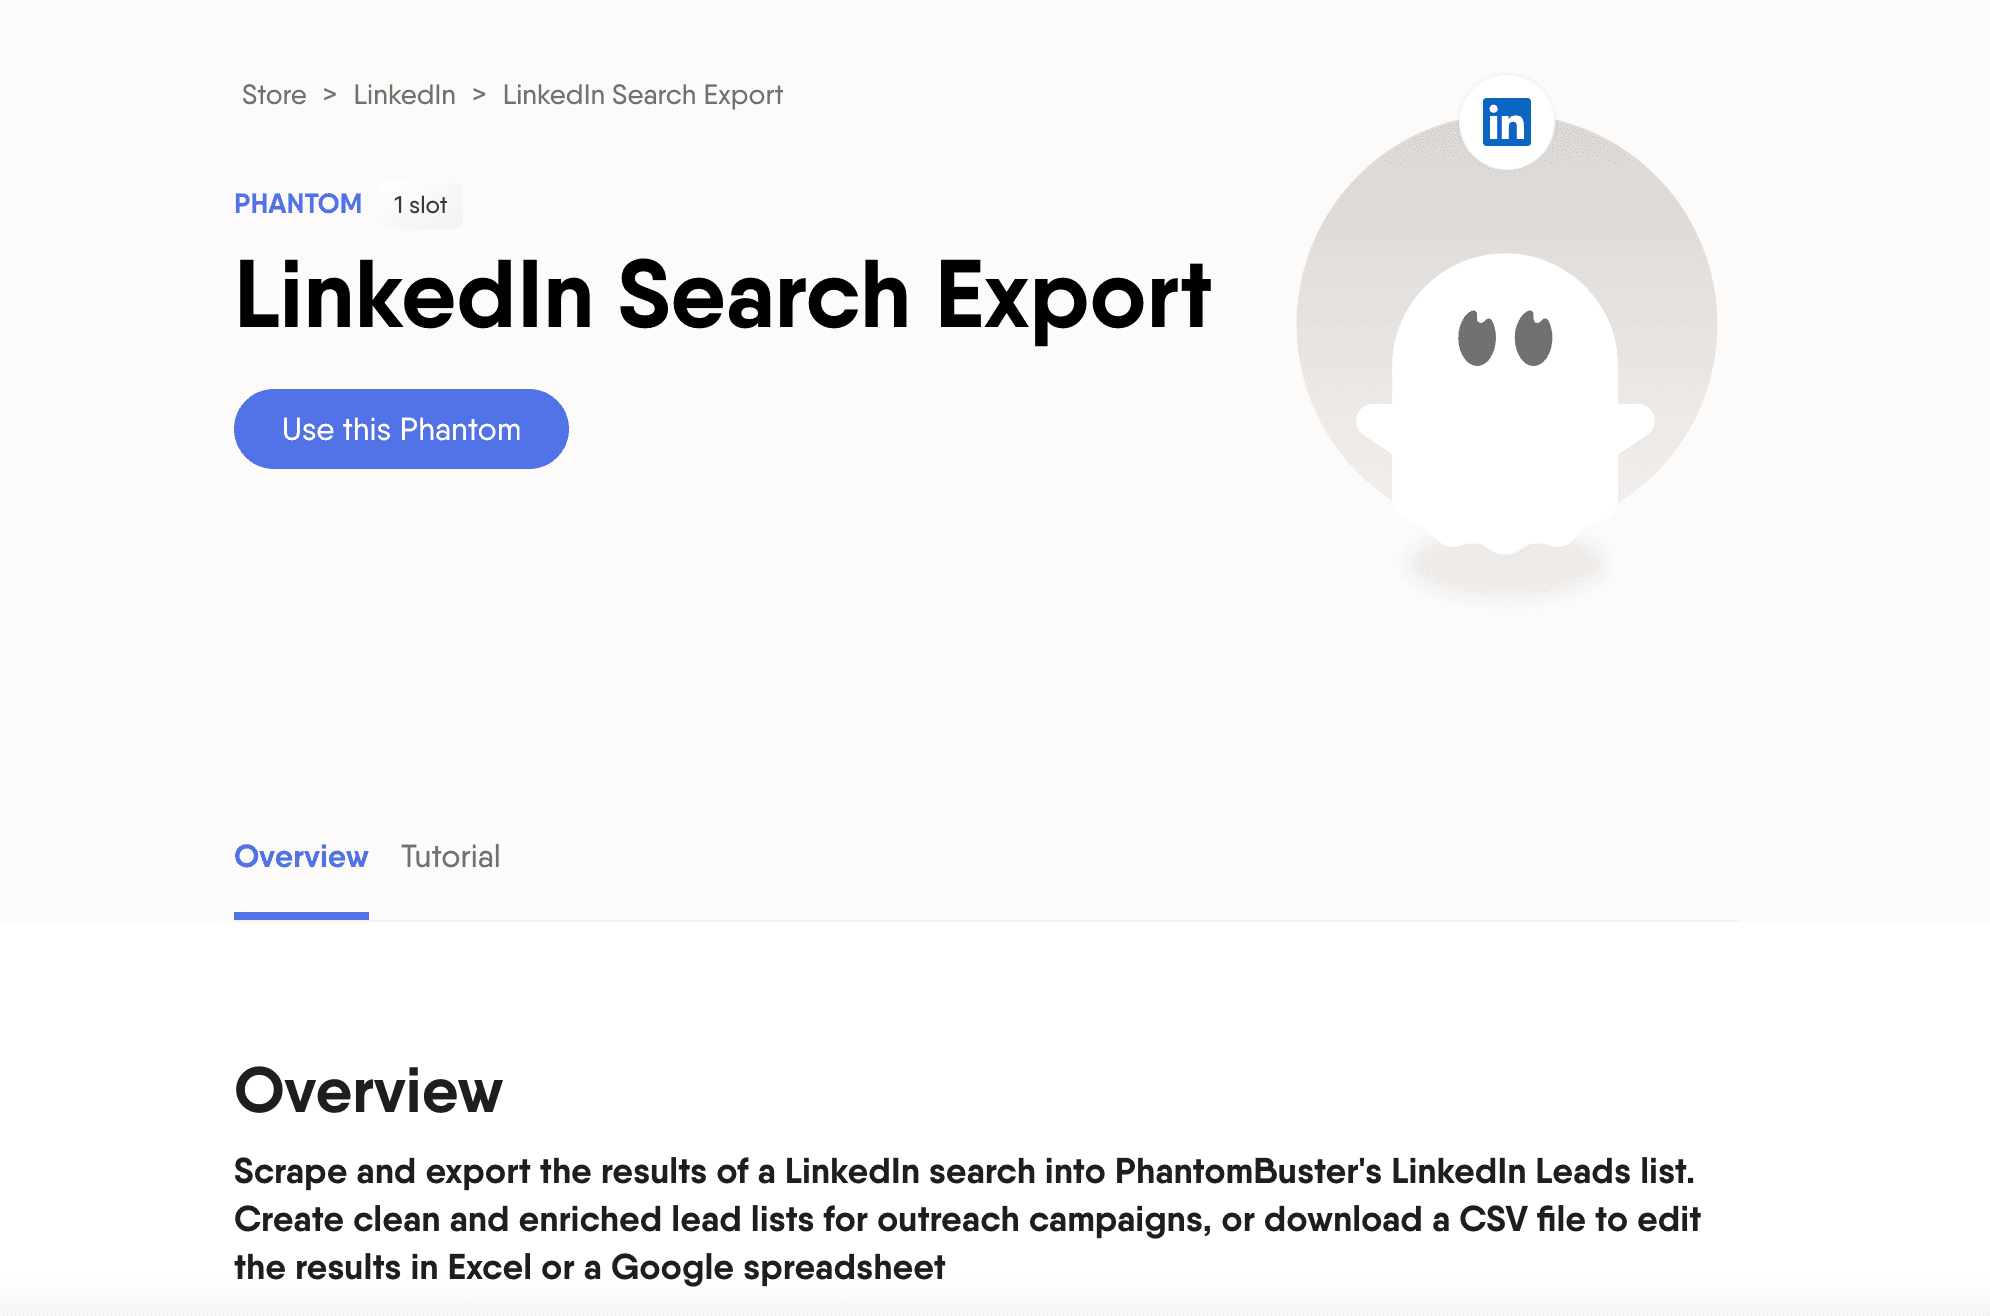 linkedin search export phantombuster product page - image14.png